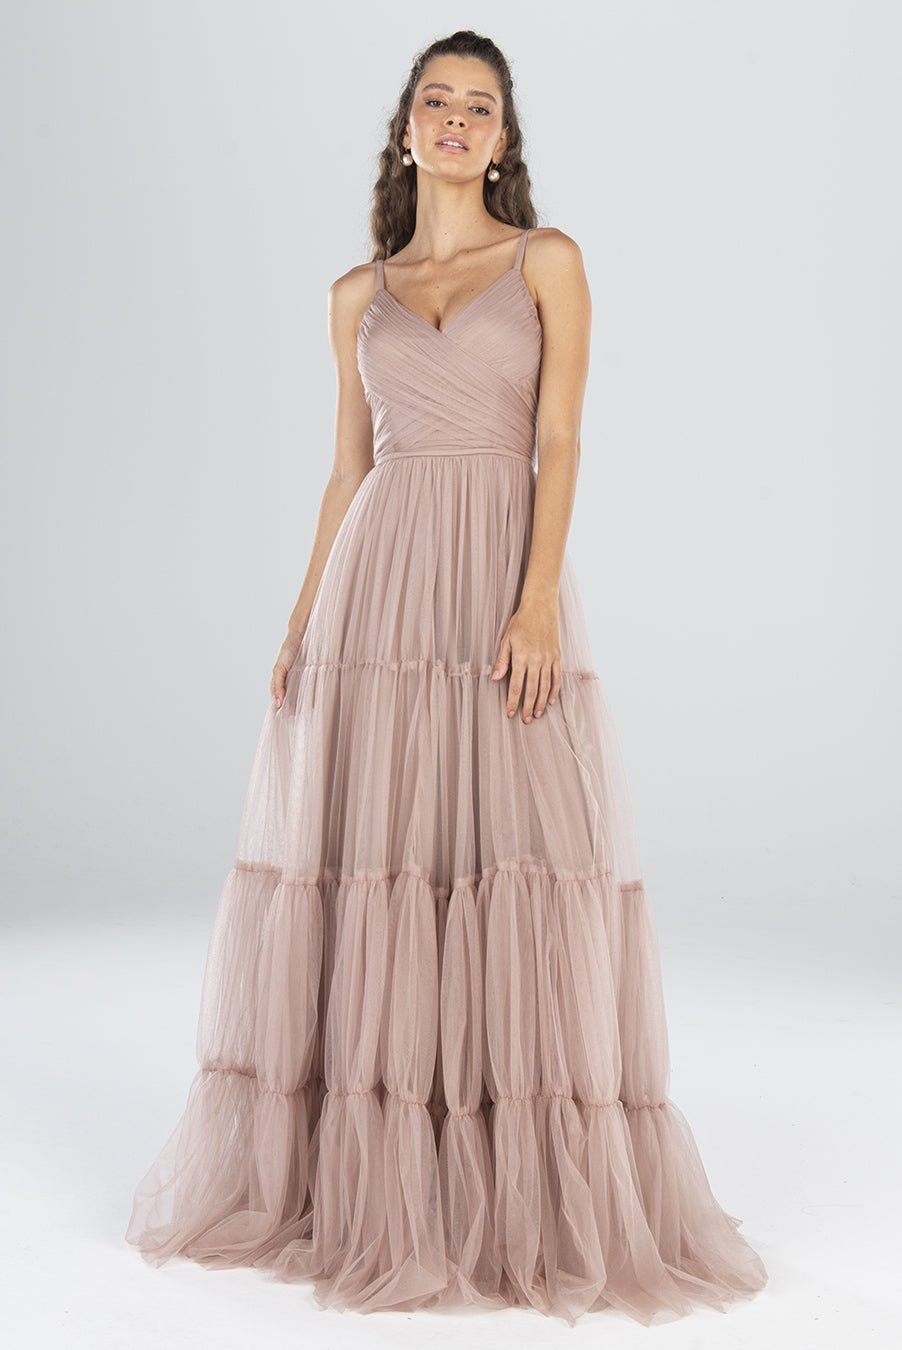 Cidal - Mystic Evenings | Evening and Prom Dresses